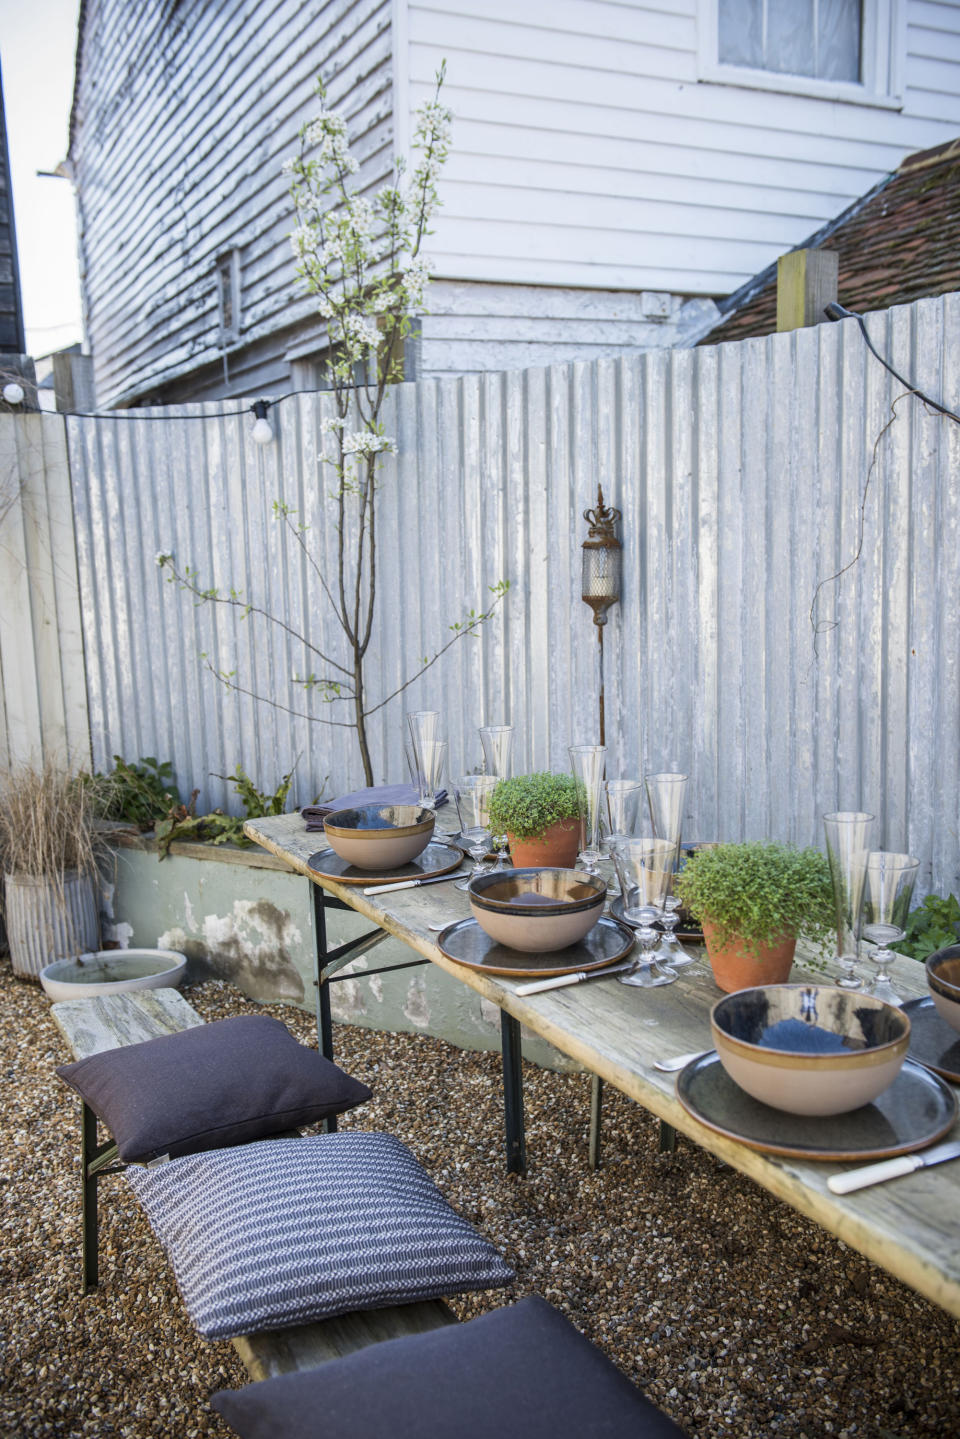 INCLUDE UNUSUAL MATERIALS FOR YOUR BUDGET GARDEN IDEAS